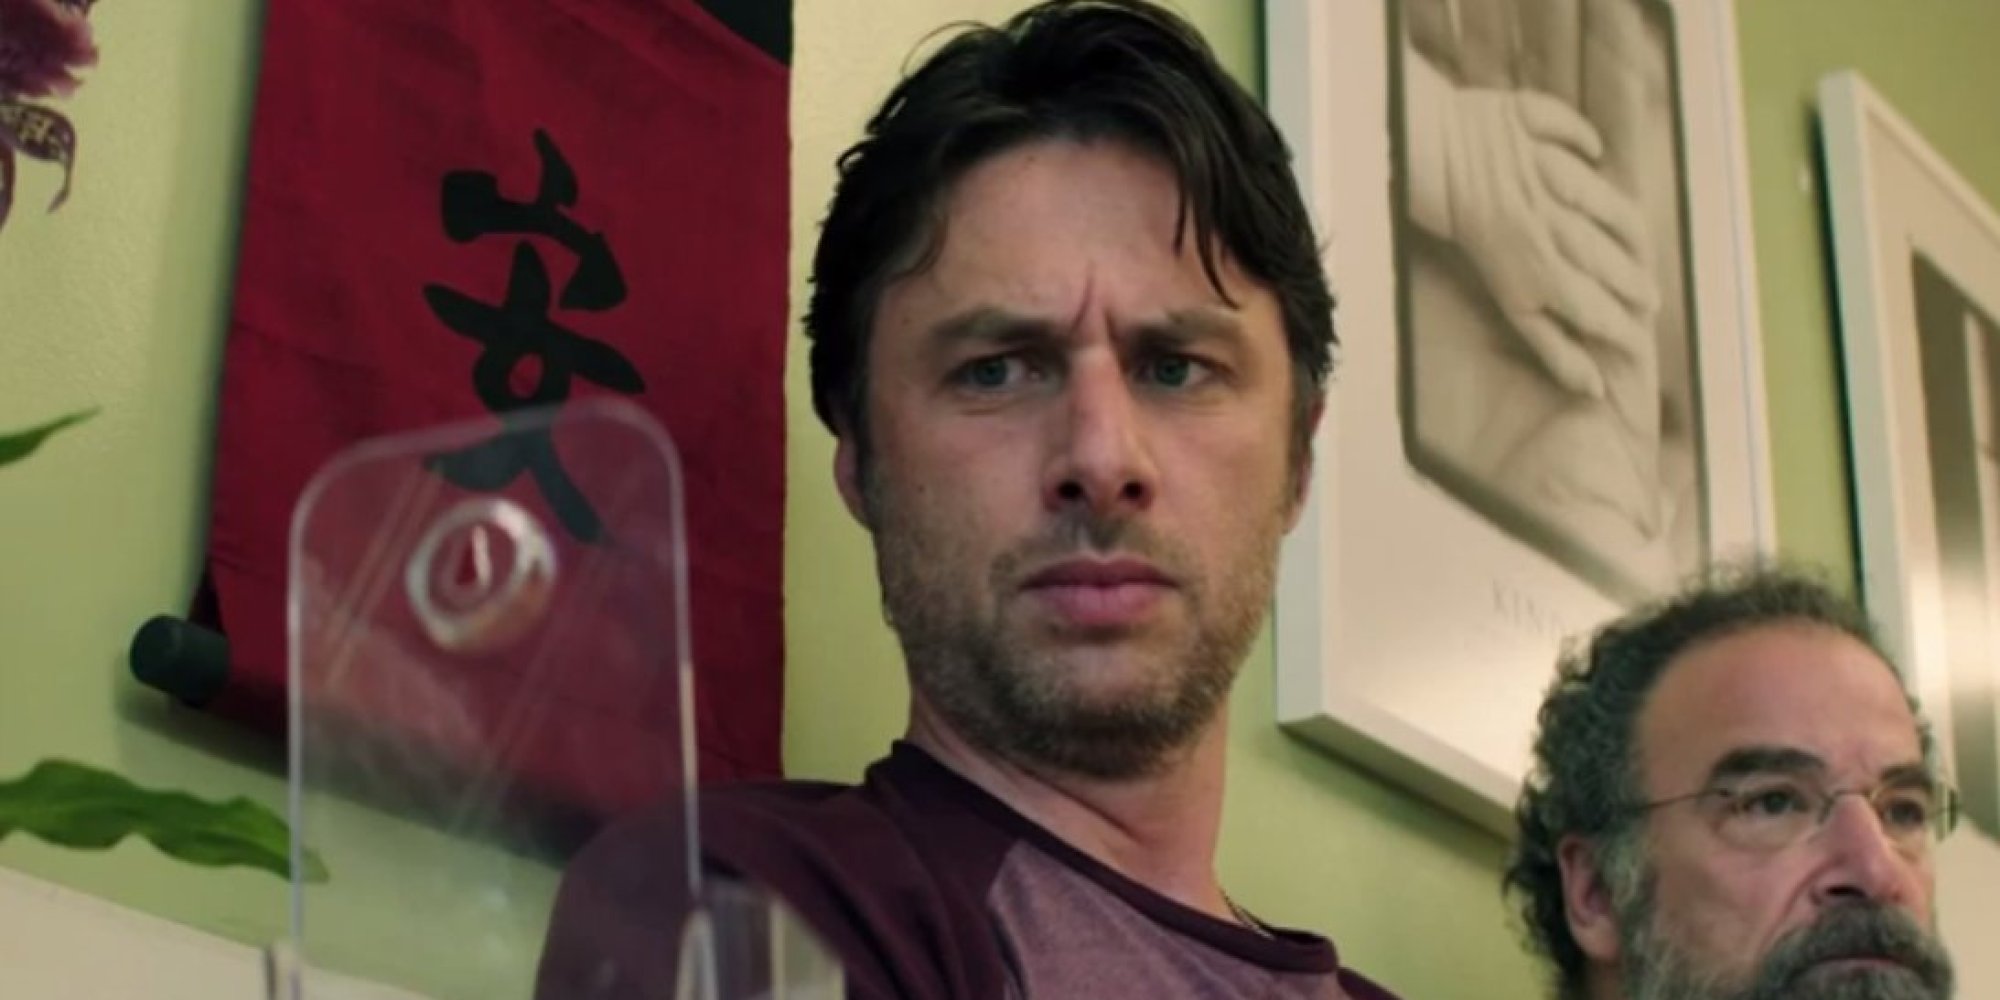 7 Phrases That Sum Up Zach Braff's 'Wish I Was Here' Trailer | HuffPost